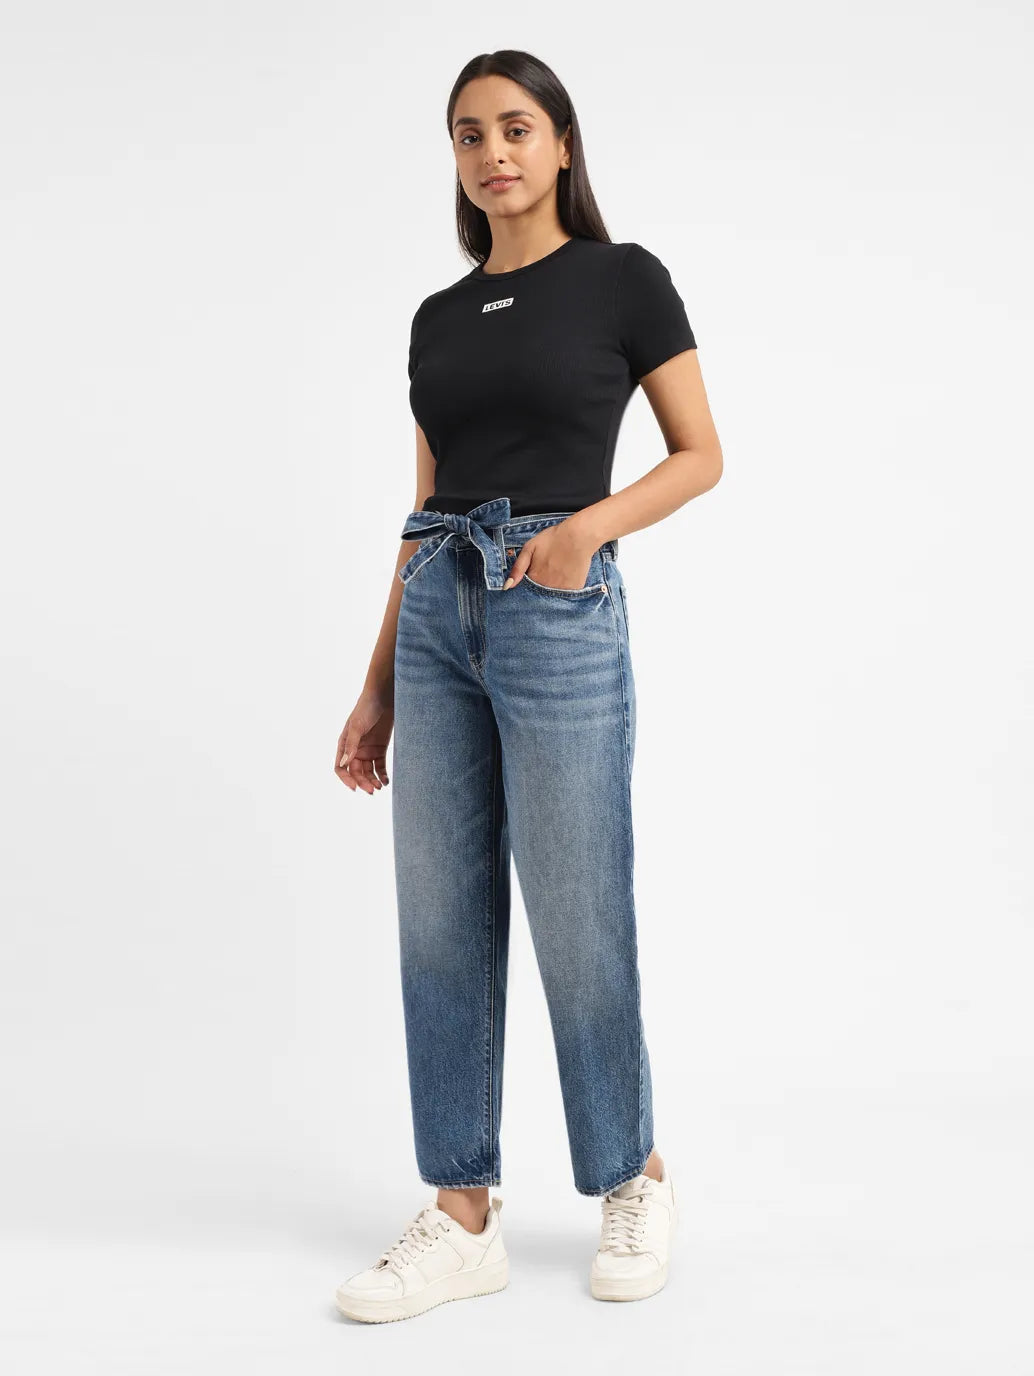 Women's High Rise 94 Baggy Loose Fit Jeans